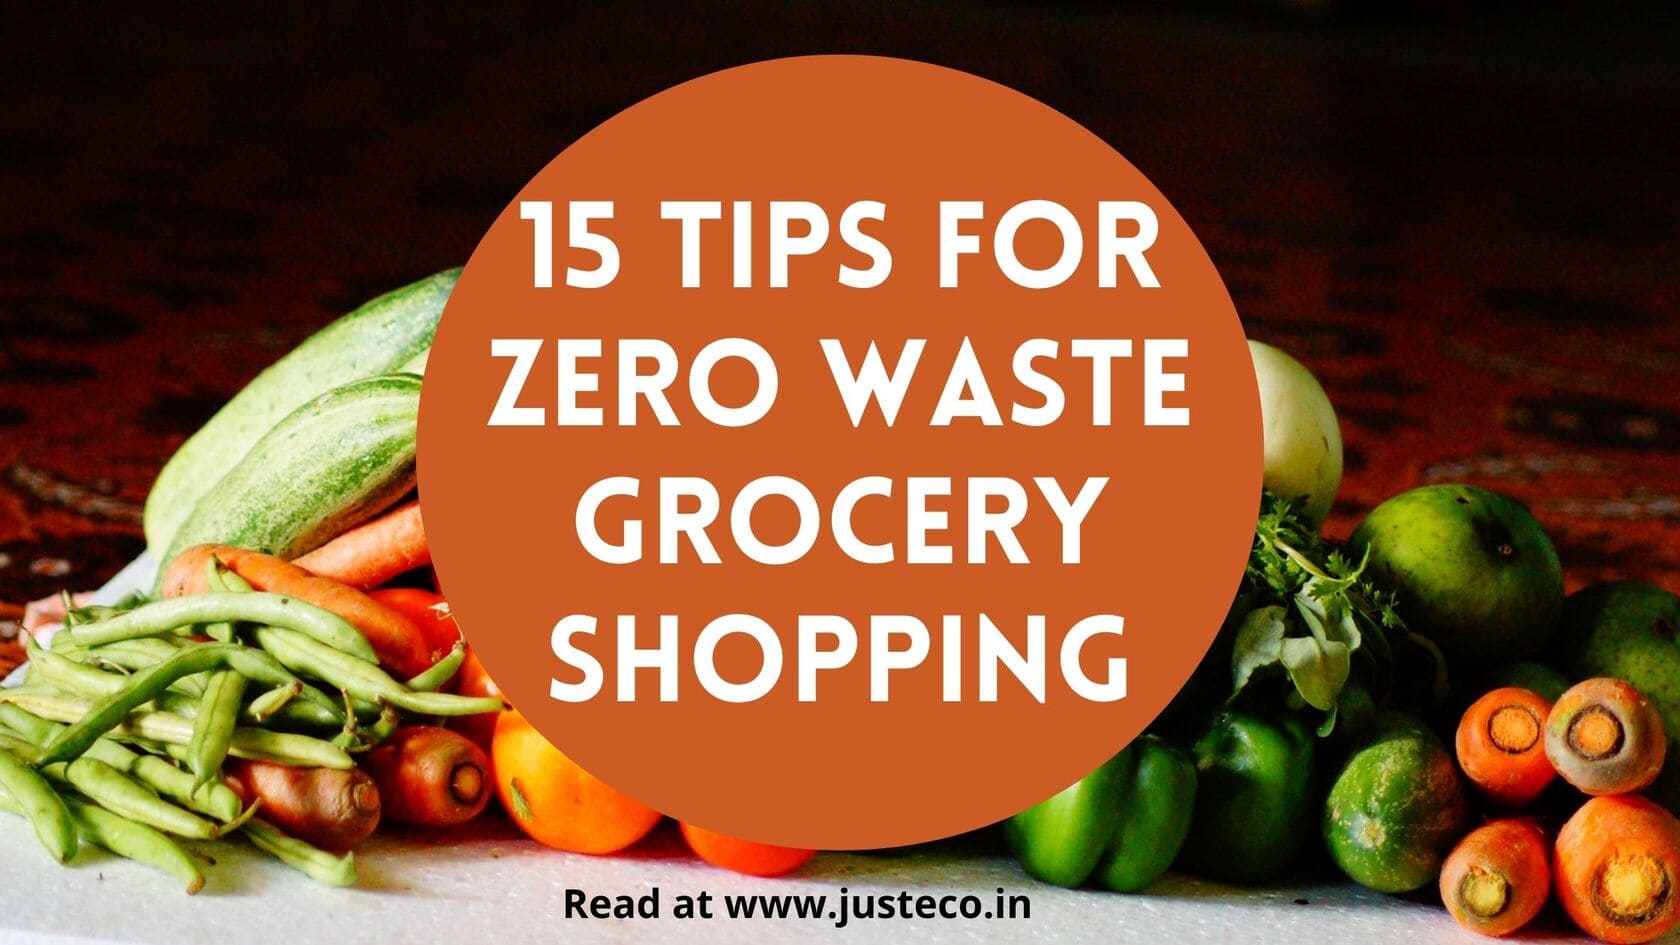 15 Tips For Zero Waste Grocery Shopping